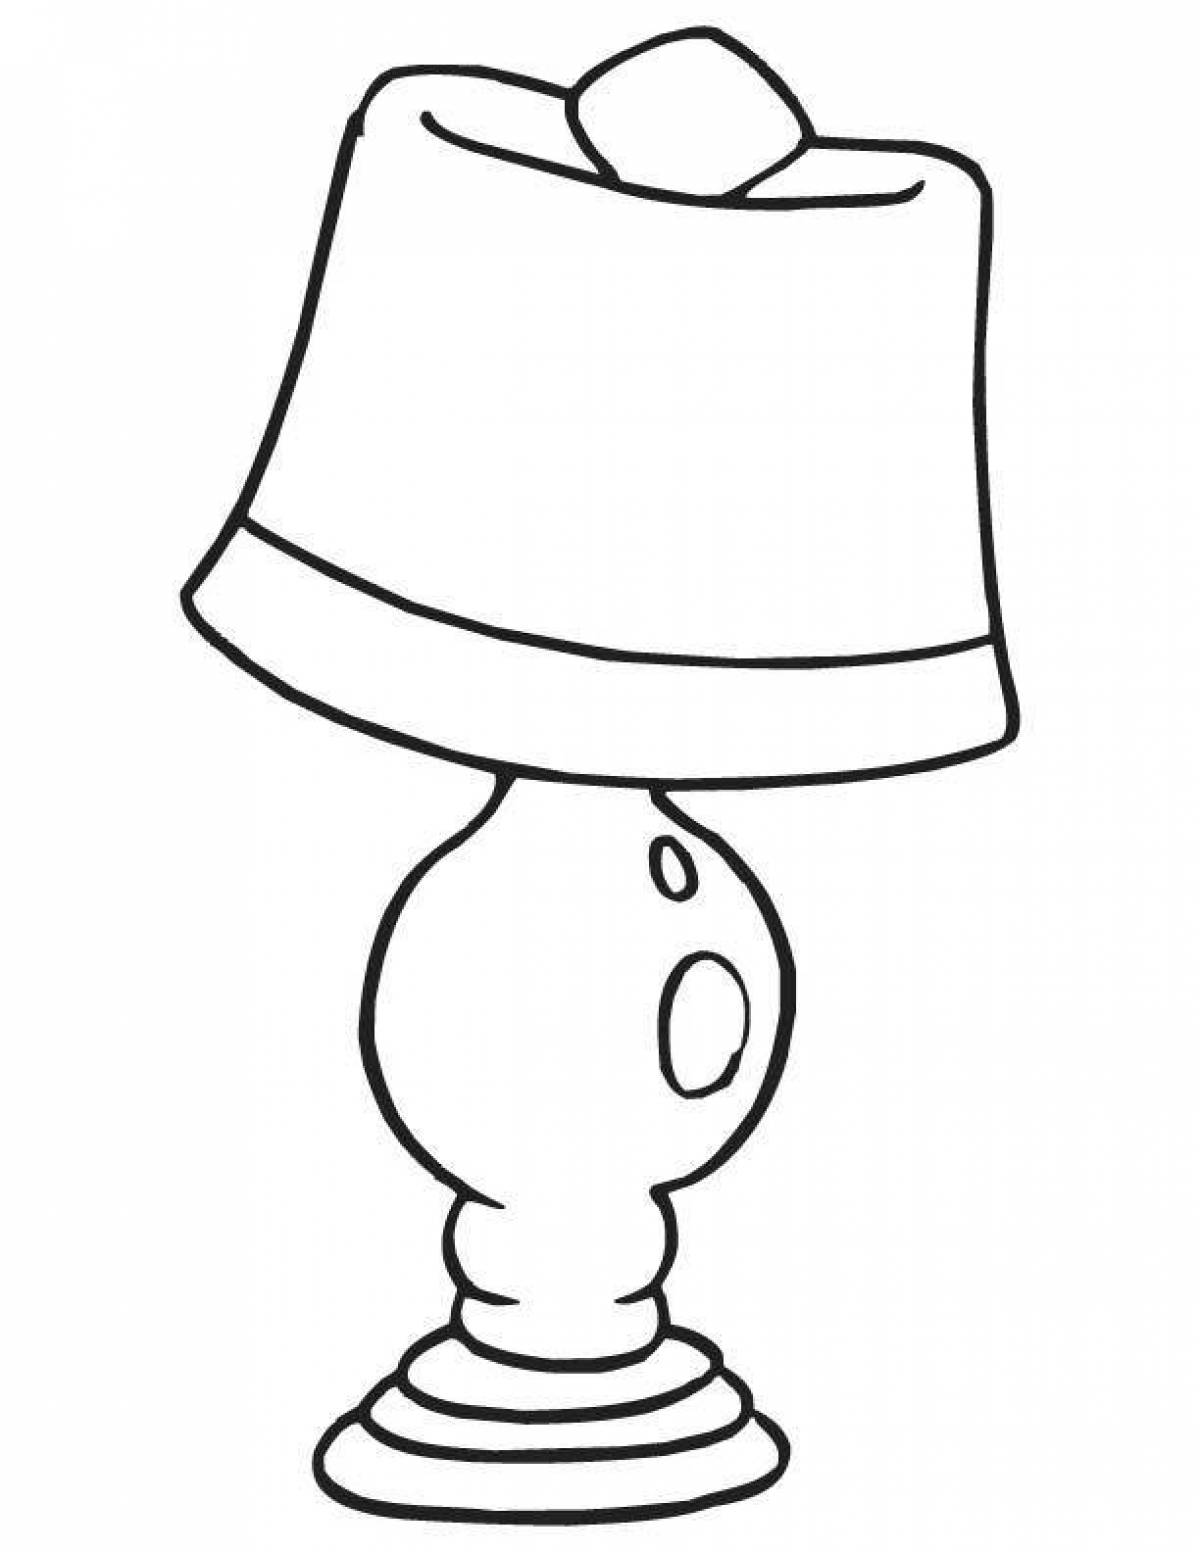 Charming lamp coloring page